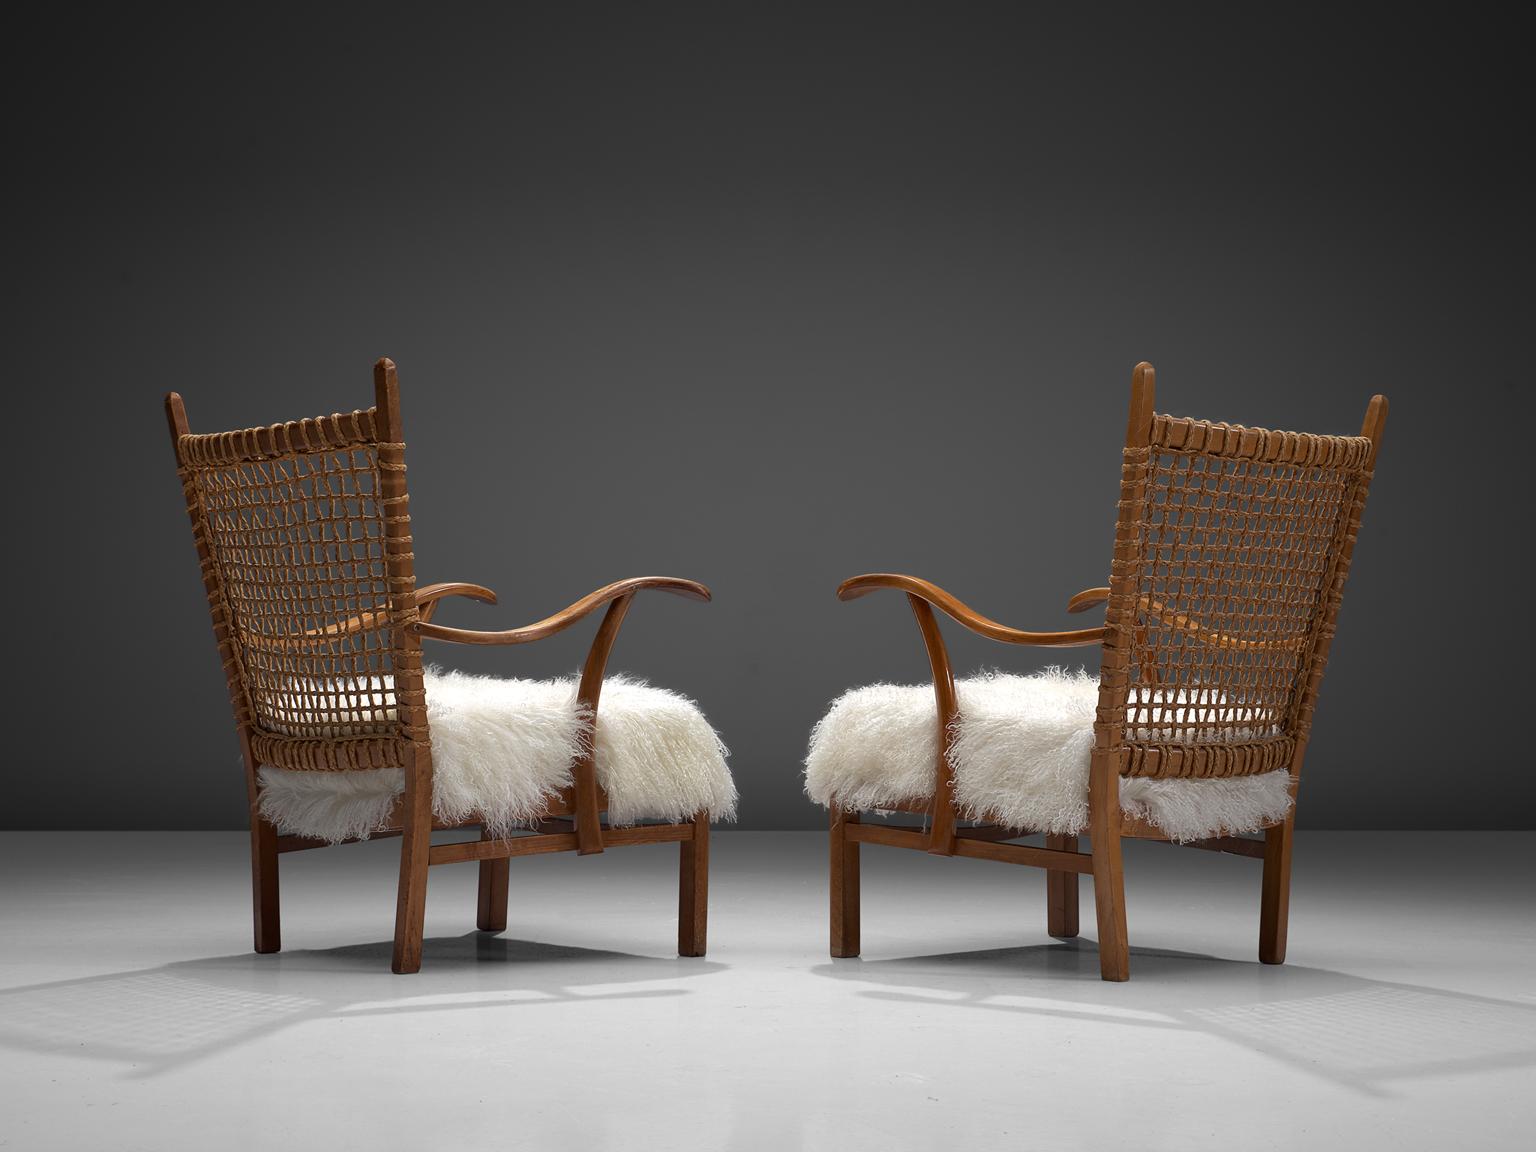 Dutch set of 2 armchair, oak, cane, Tibetan wool, the Netherlands, 1940s.

This robust Dutch chair originates from the late 1940s. The seat is make of oak and back is made of woven cane.. This natural, robust style is typical for design of the